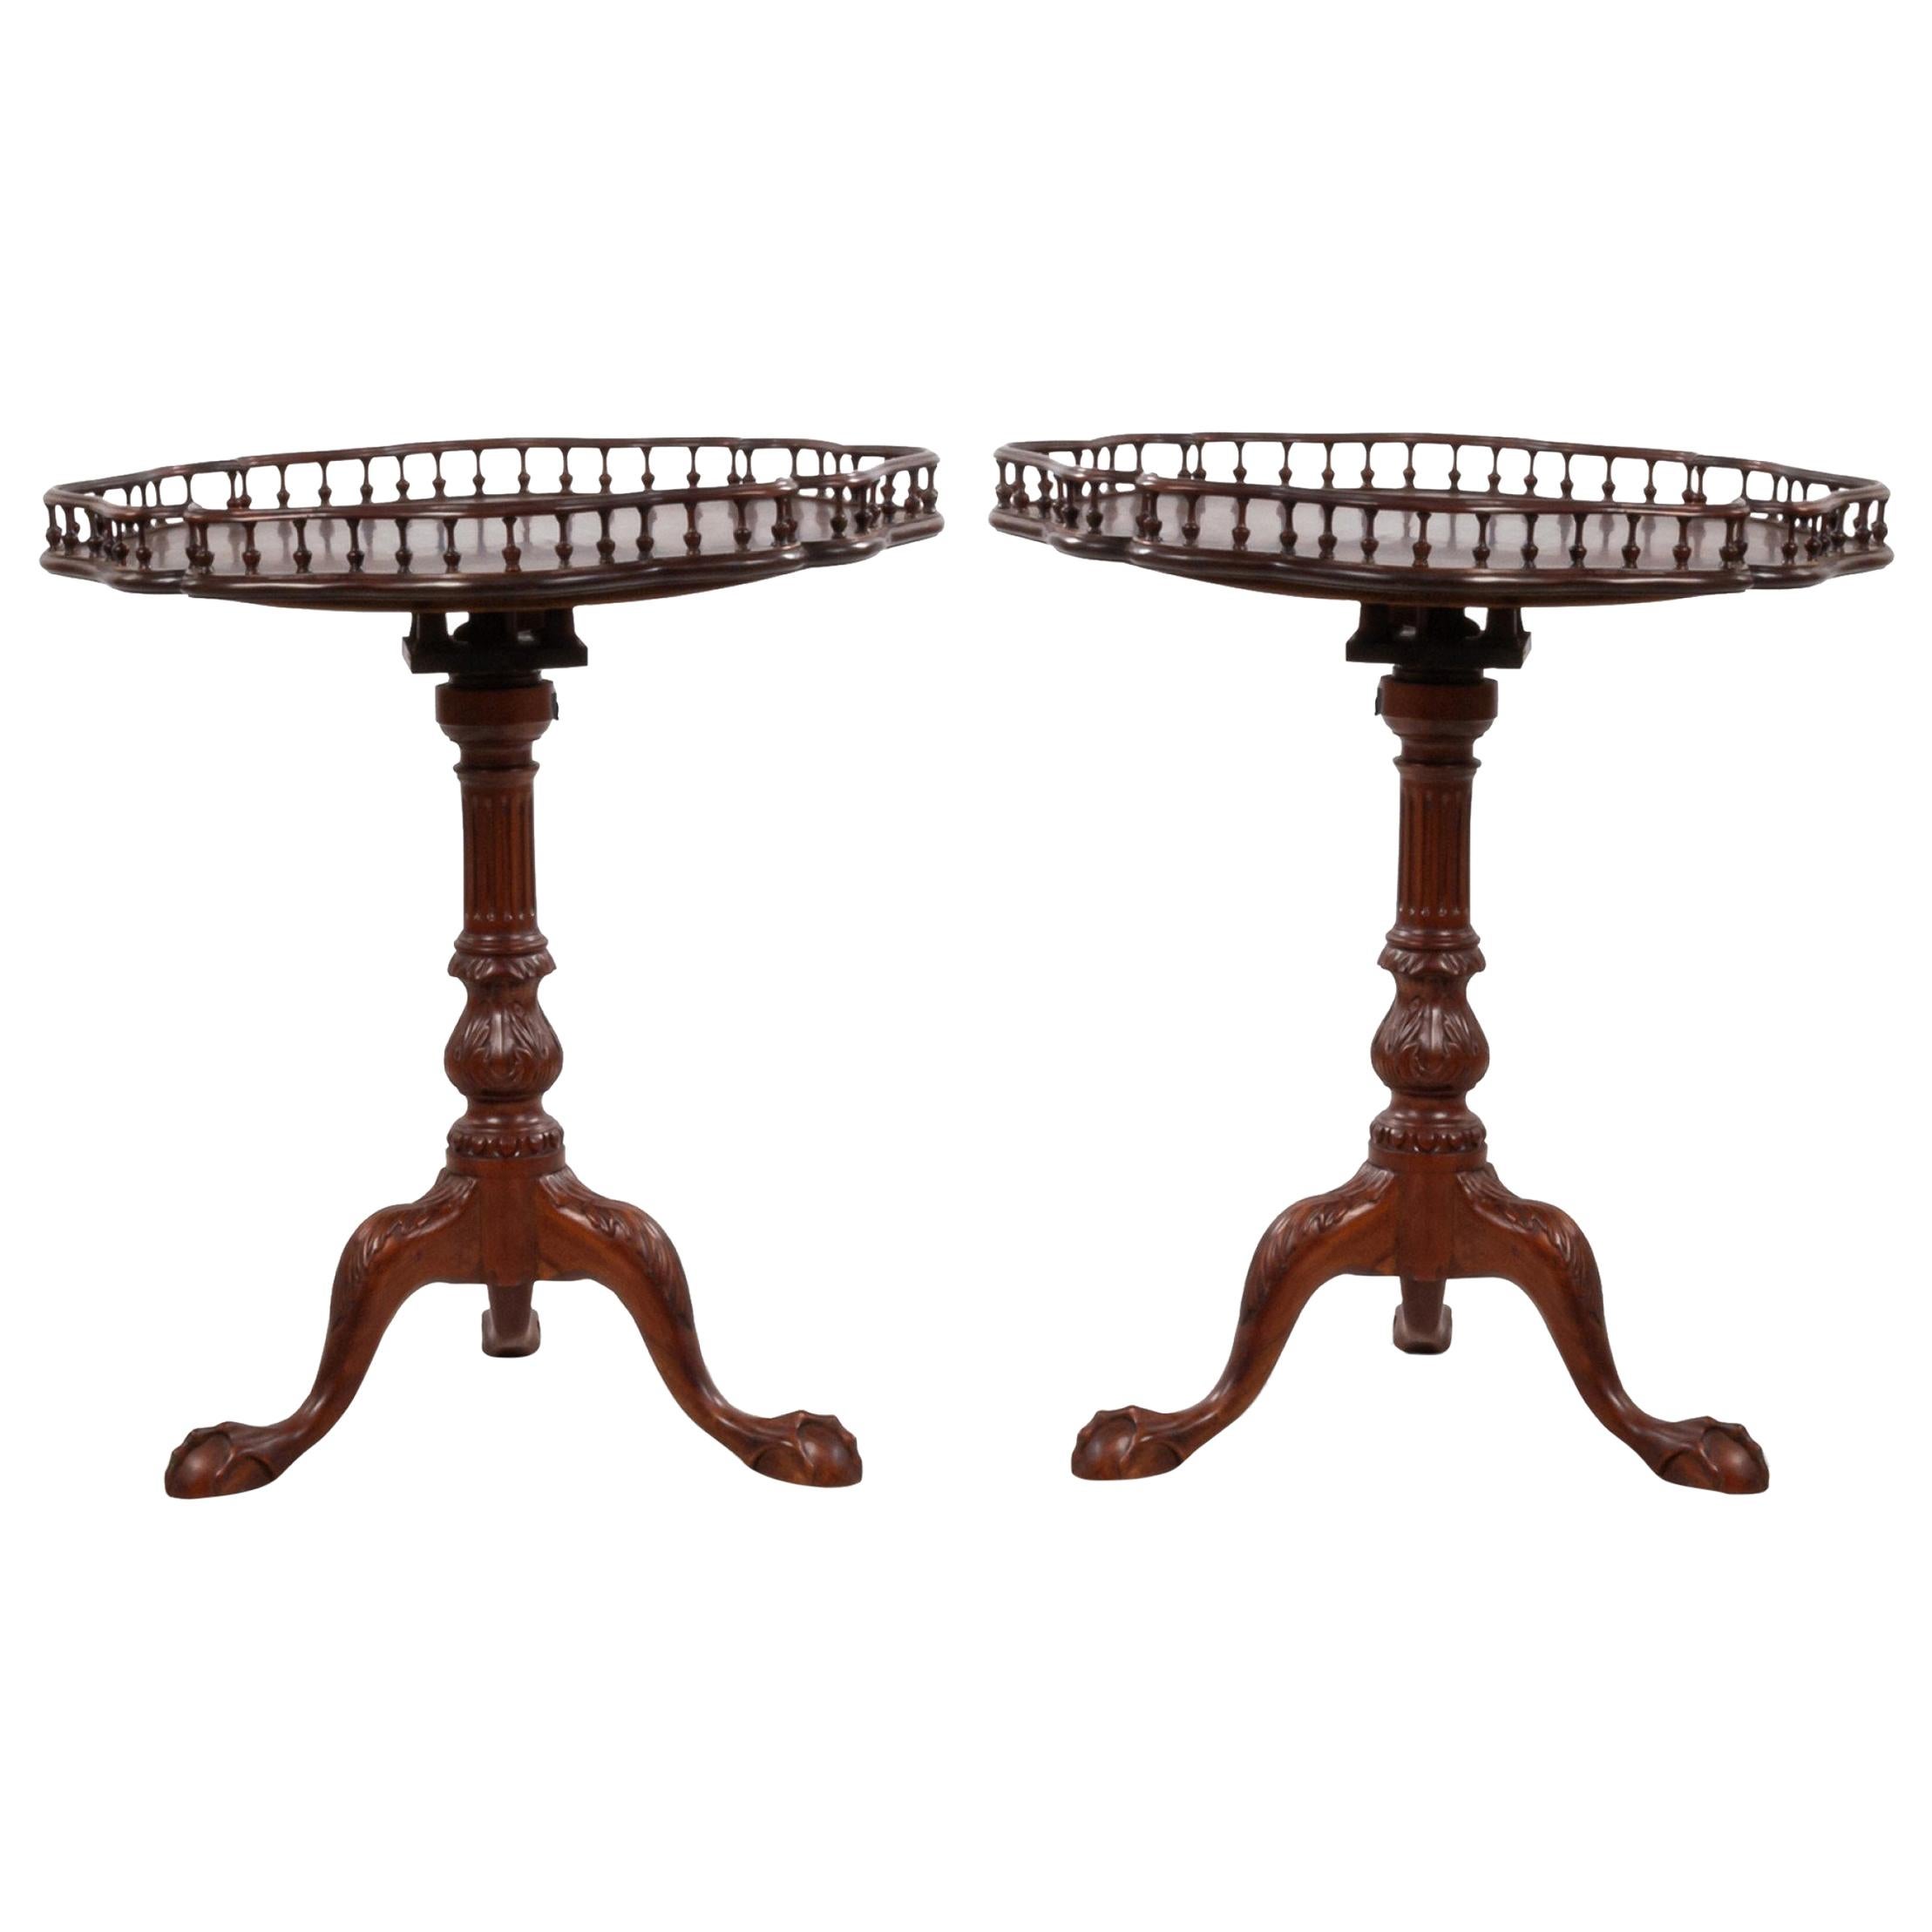 Mahogany Flip Top Side Tables with Gallery For Sale